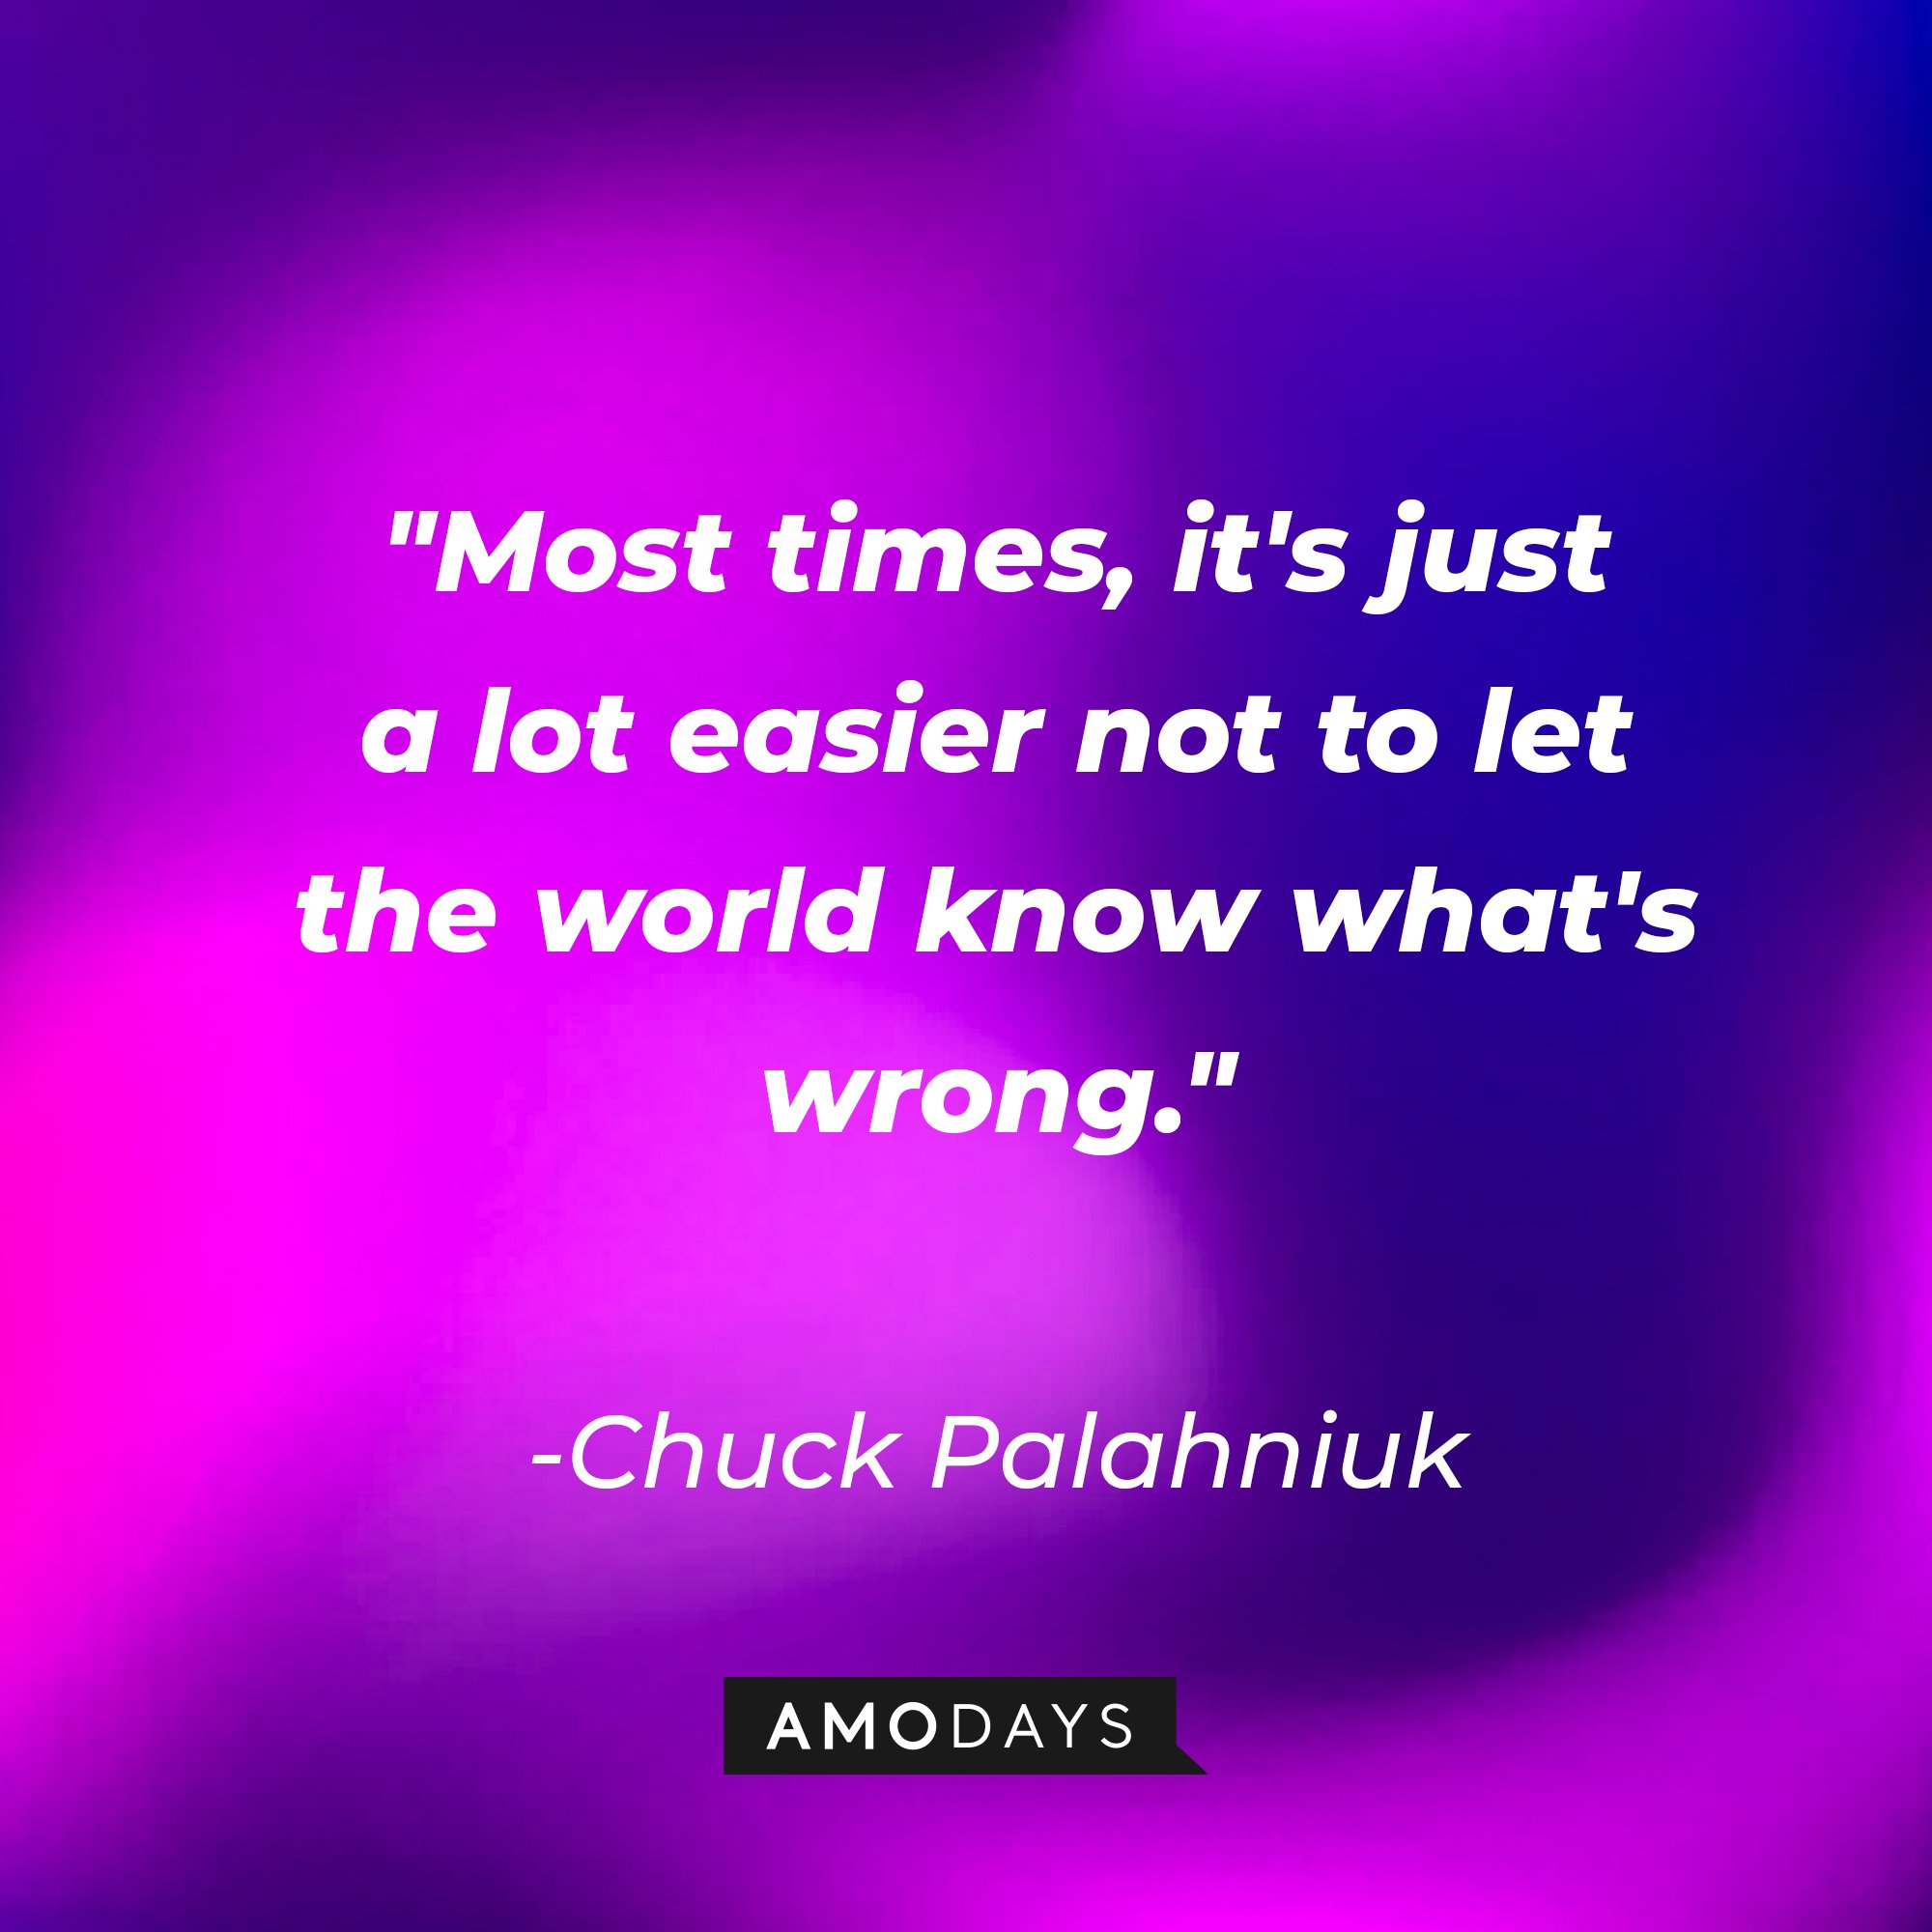 Chuck Palahniuk's quote: "Most times, it's just a lot easier not to let the world know what's wrong." | Image: Amodays